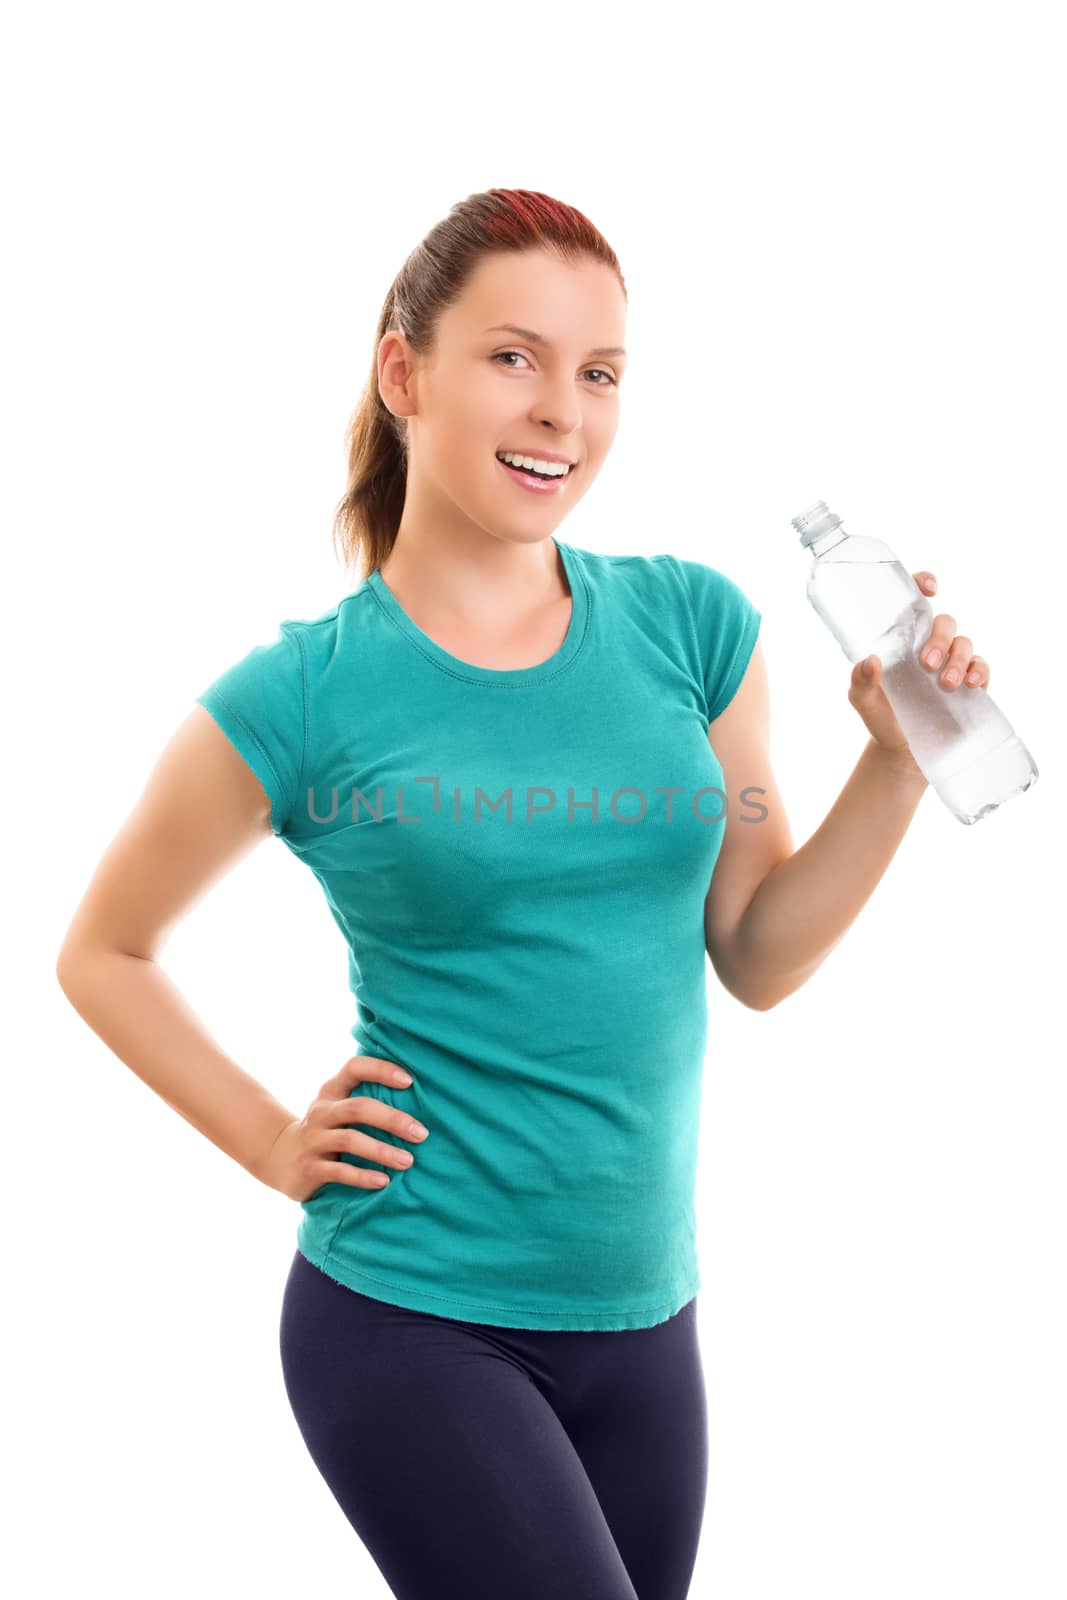 A portrait of a beautiful smiling young girl in fitness clothes holding a water bottle, isolated on white background.